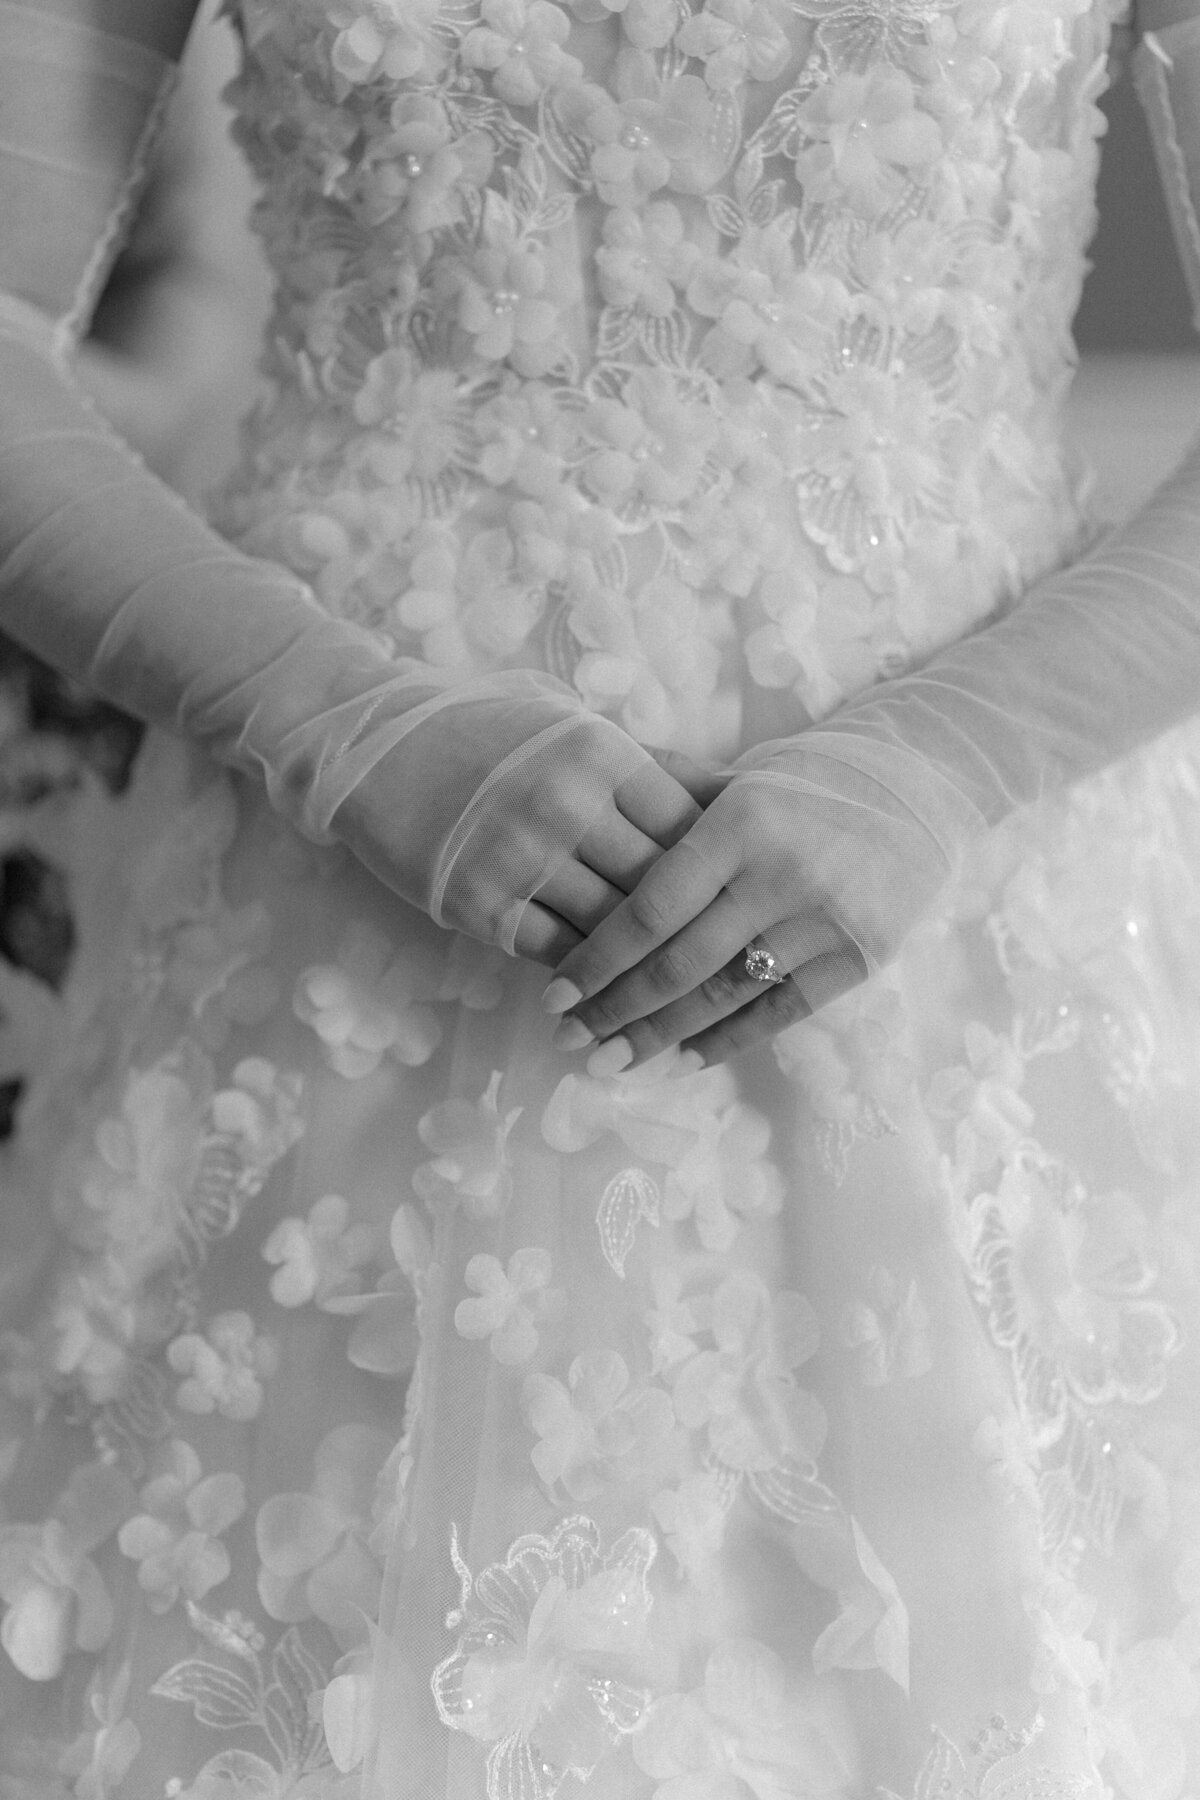 Bride wearing sheer sleeves that partially covers hands. Bride holding finger tips to show wedding rings. Flower embellished wedding gown. Black and white Charleston wedding photographer.